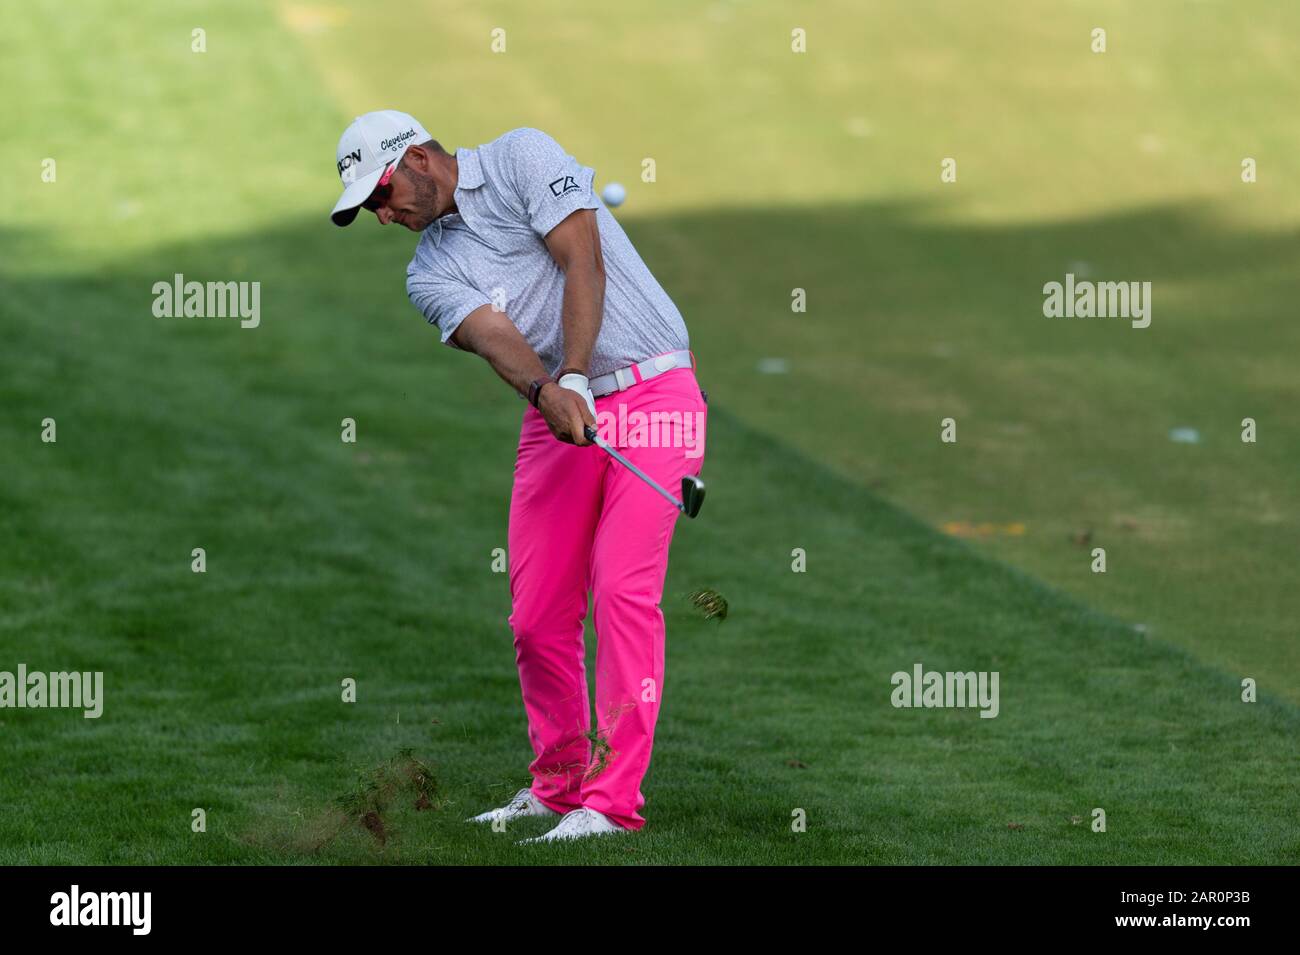 Dean Burmester of South Africa plays a shot to the 14th green in round 3  during the PGA European Tour Dubai Desert Classic at Emirates Golf Club,  Dubai, UAE on 25 January